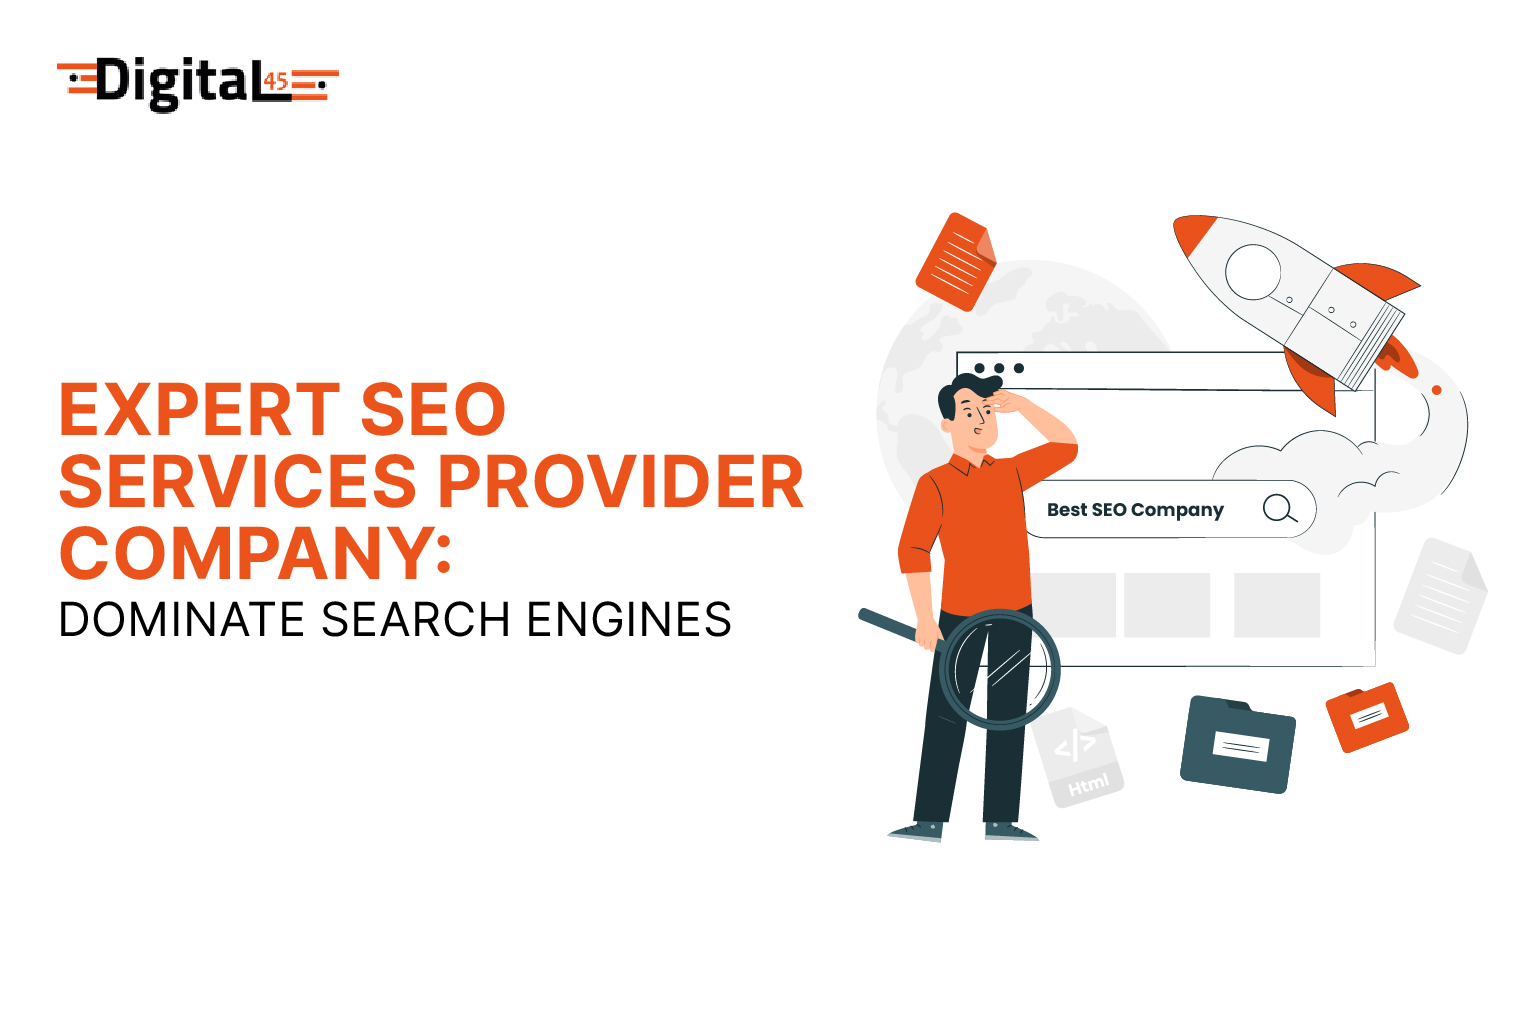   Expert SEO Services Provider Company: Dominate Search Engines